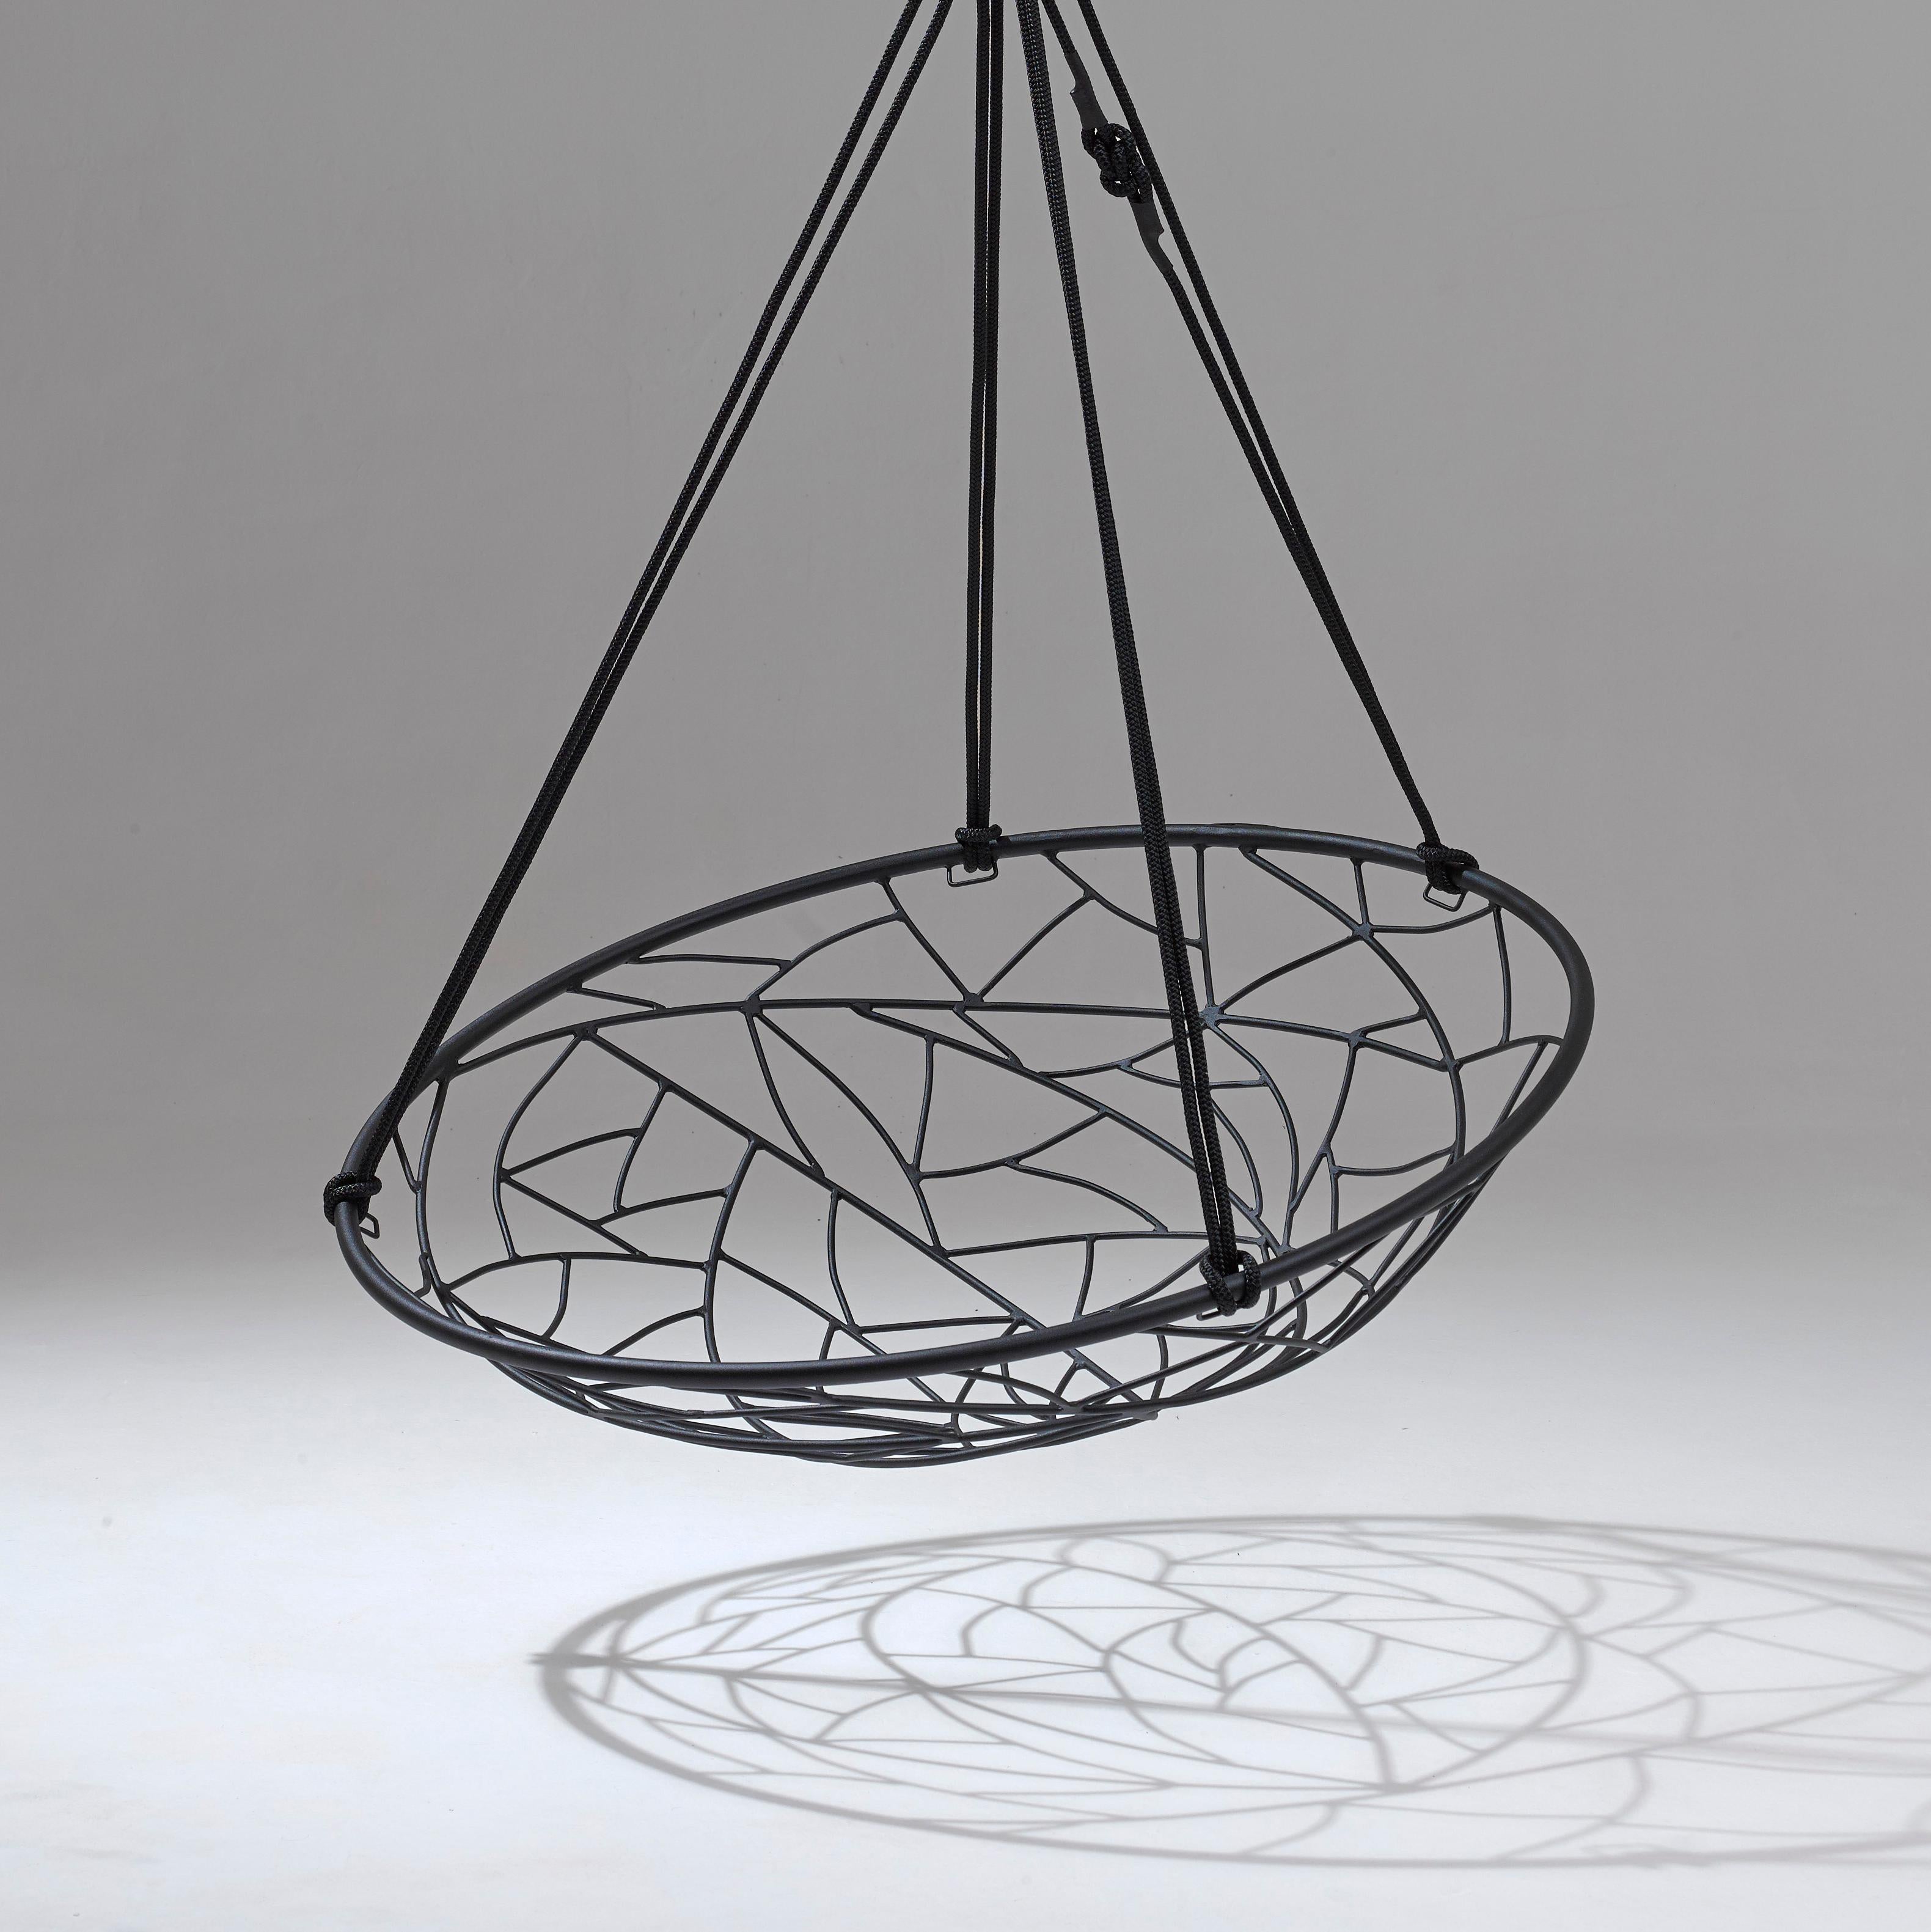 The Twig Basket by Studio Stirling is a Mild Steel Single-seater, made to support, relax, and fit elegantly into a range of interior styles. Expert Craftmanship has been combined with the Masterful Design Direction of Joanina Pastoll to produce a